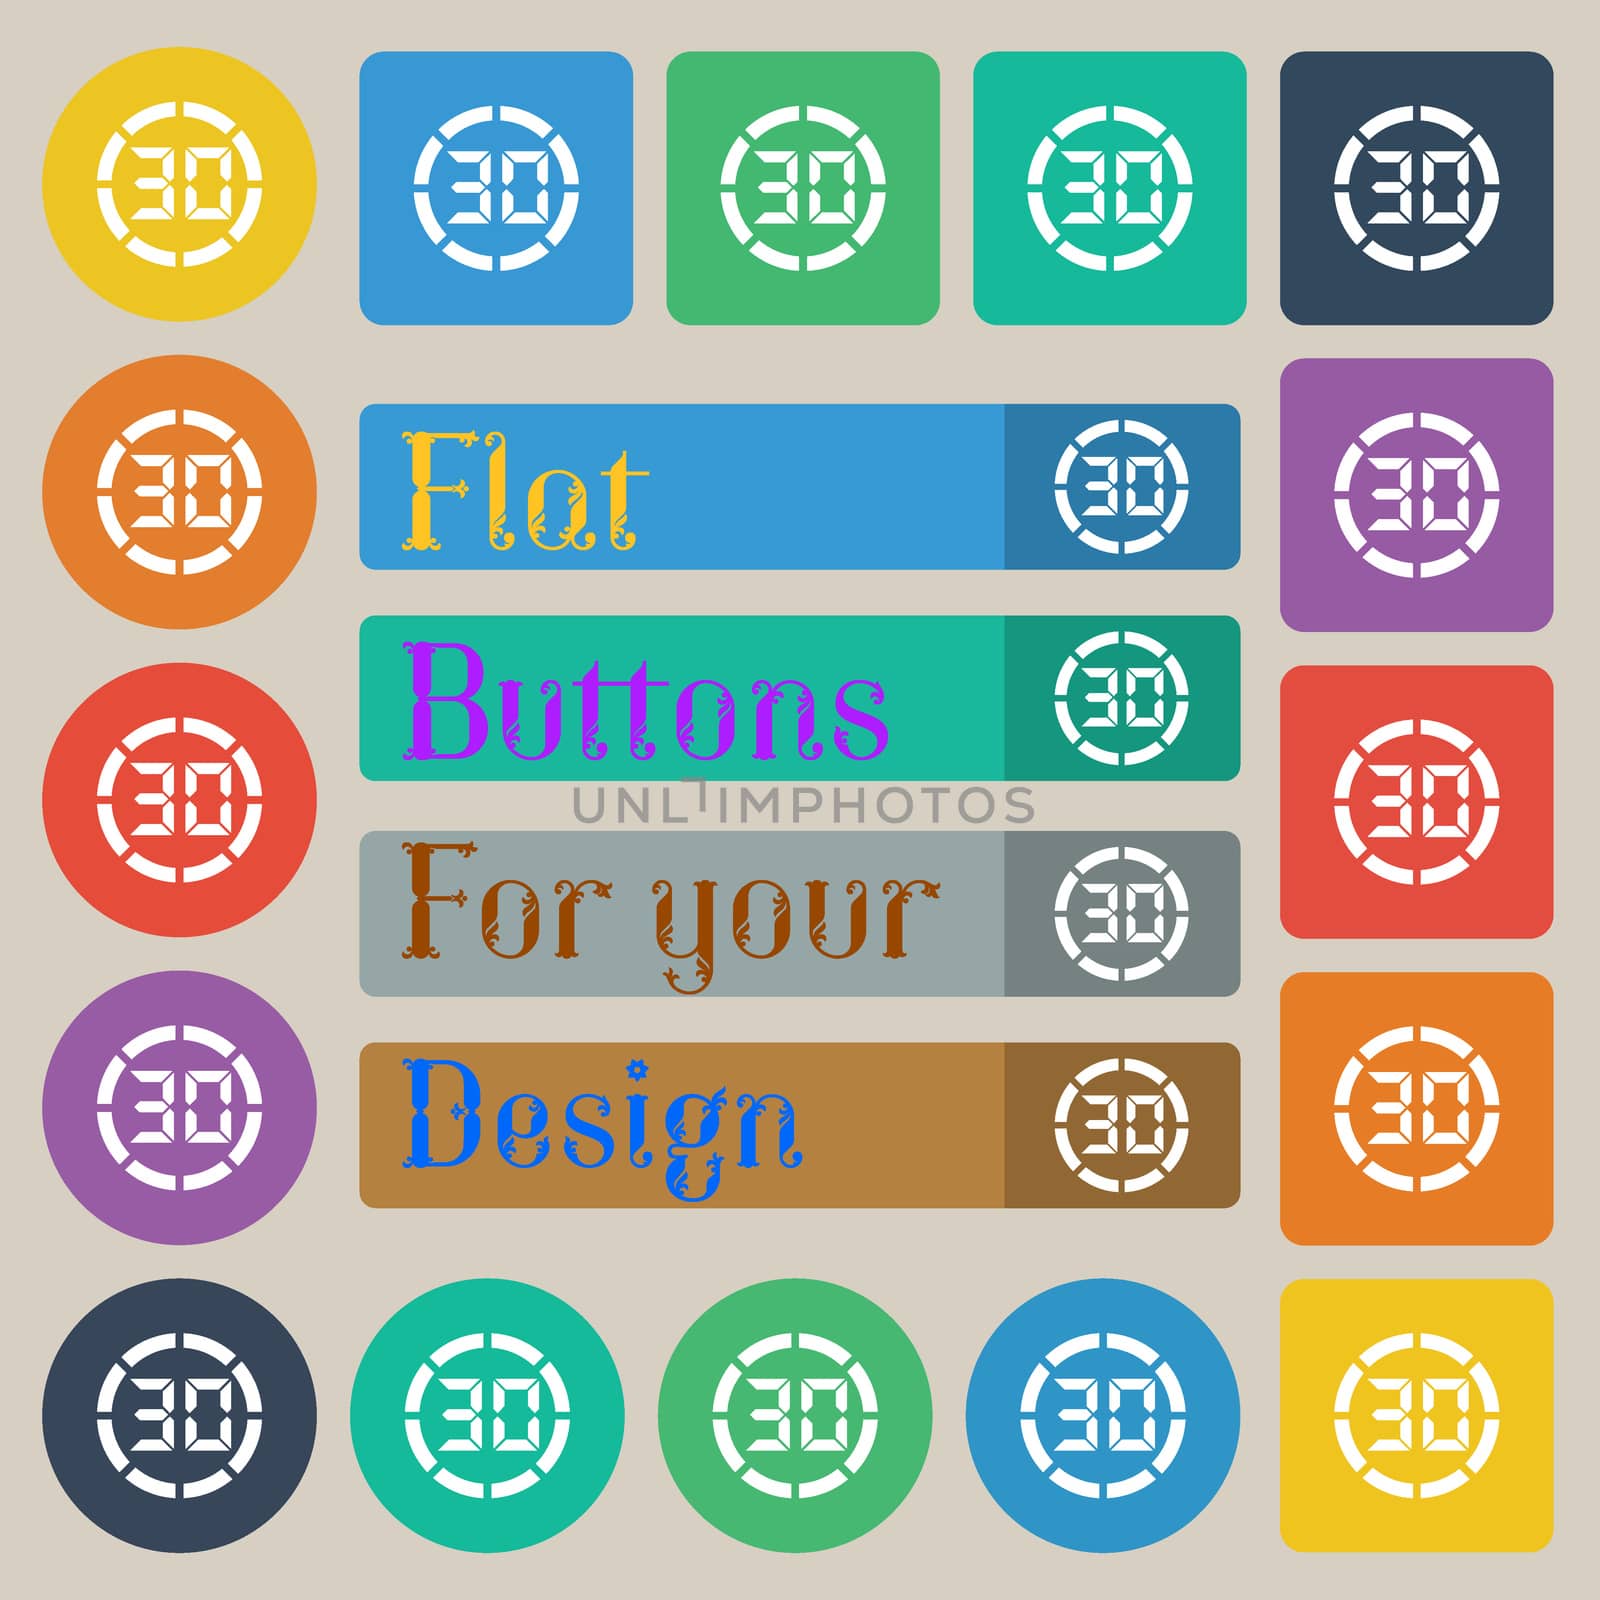 30 second stopwatch icon sign. Set of twenty colored flat, round, square and rectangular buttons. illustration